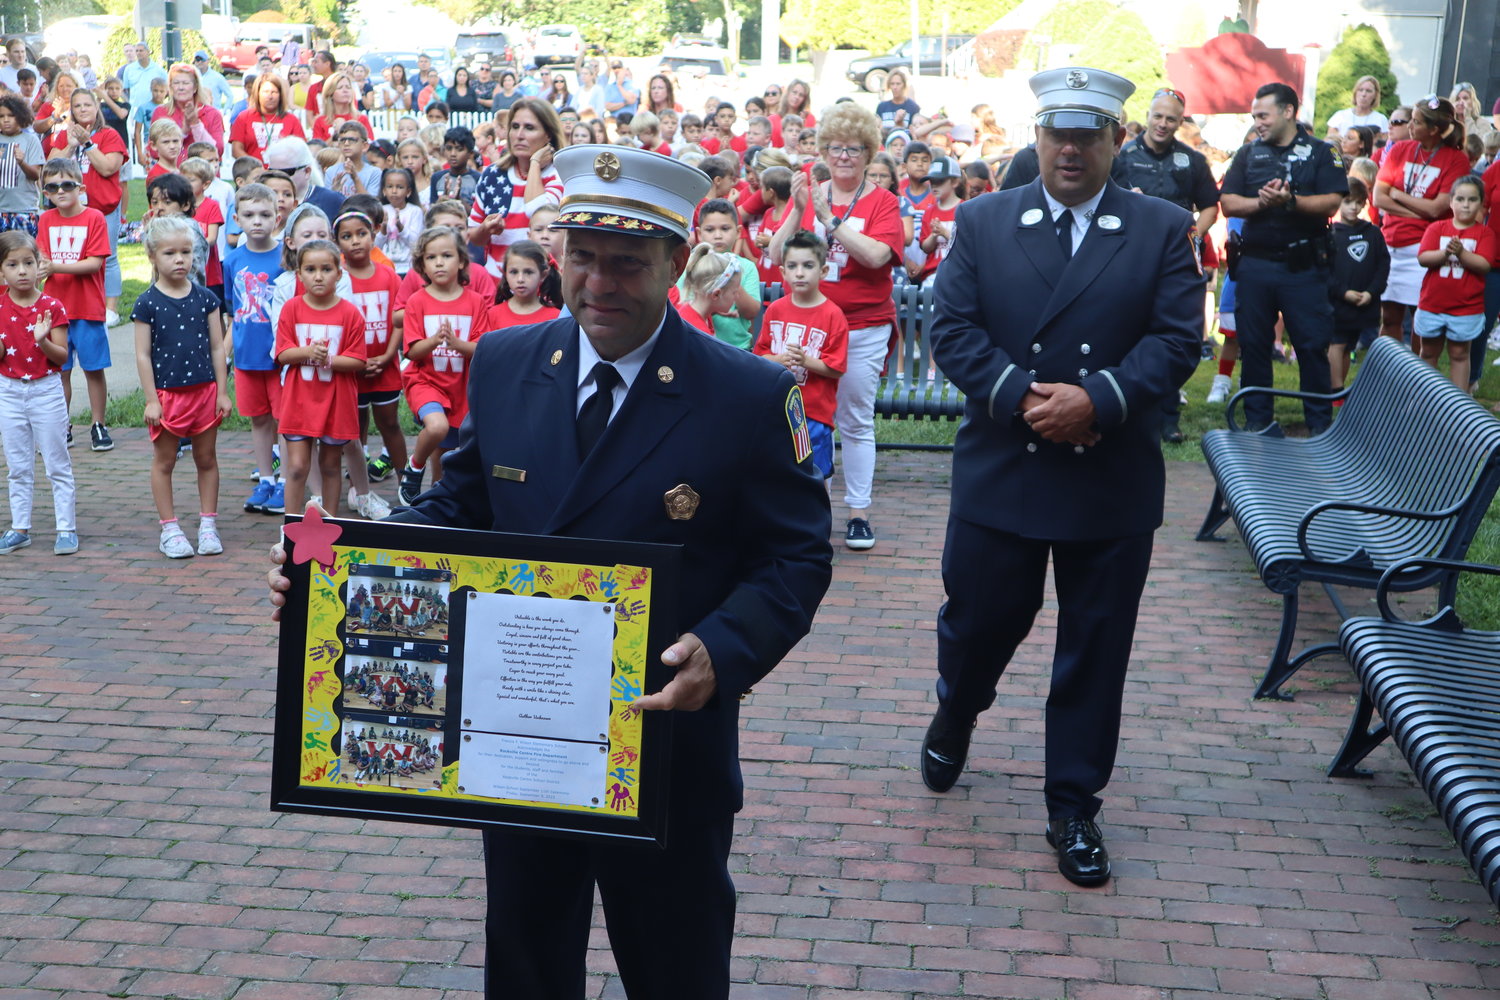 Members of the Rockville Centre Fire Department receive a plaque, provided by Wilson Elementary students, honoring them for their service.